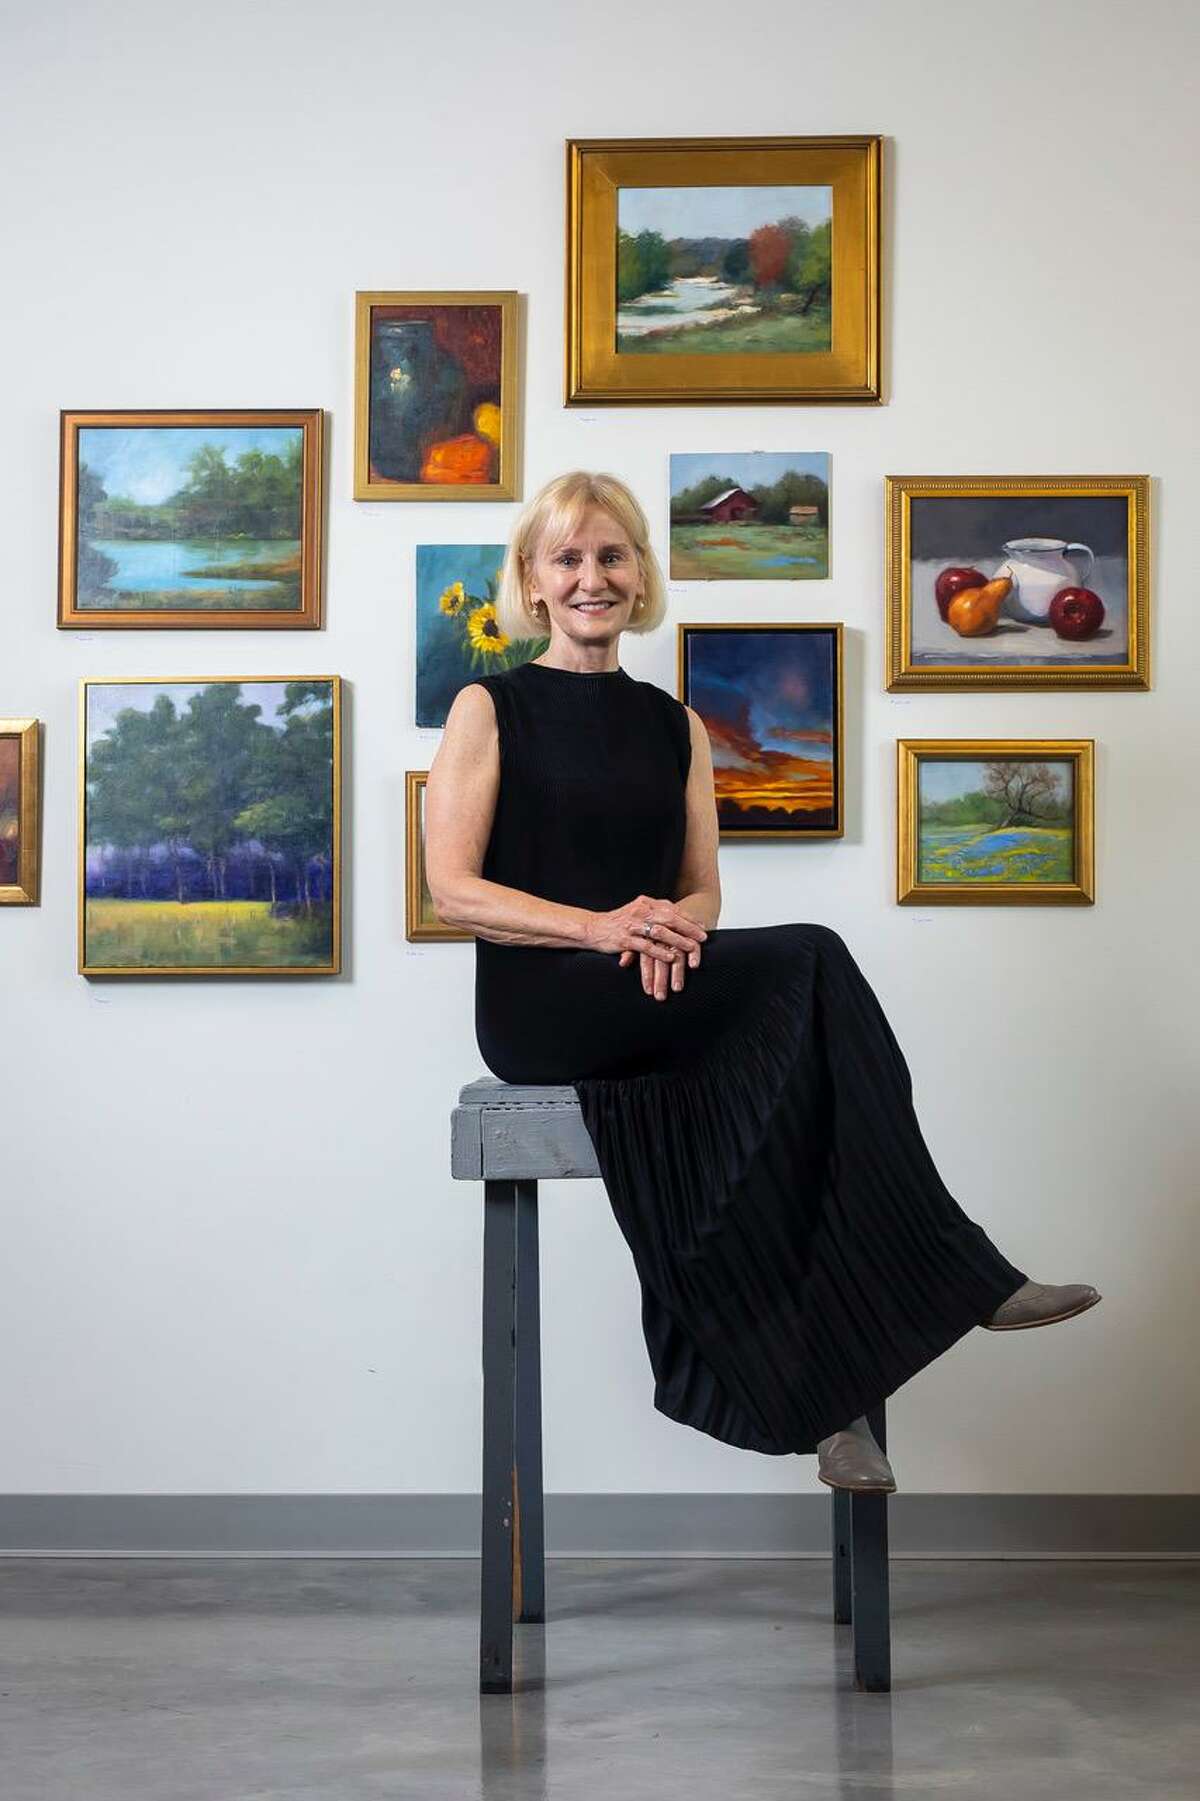 Houston artist Helene Robinson works primarily in oil and her subject matter ranges from realistic still life paintings to impressionistic landscapes. She is seen in her studio at Art Square Studios on Almeda with some of her recent works.